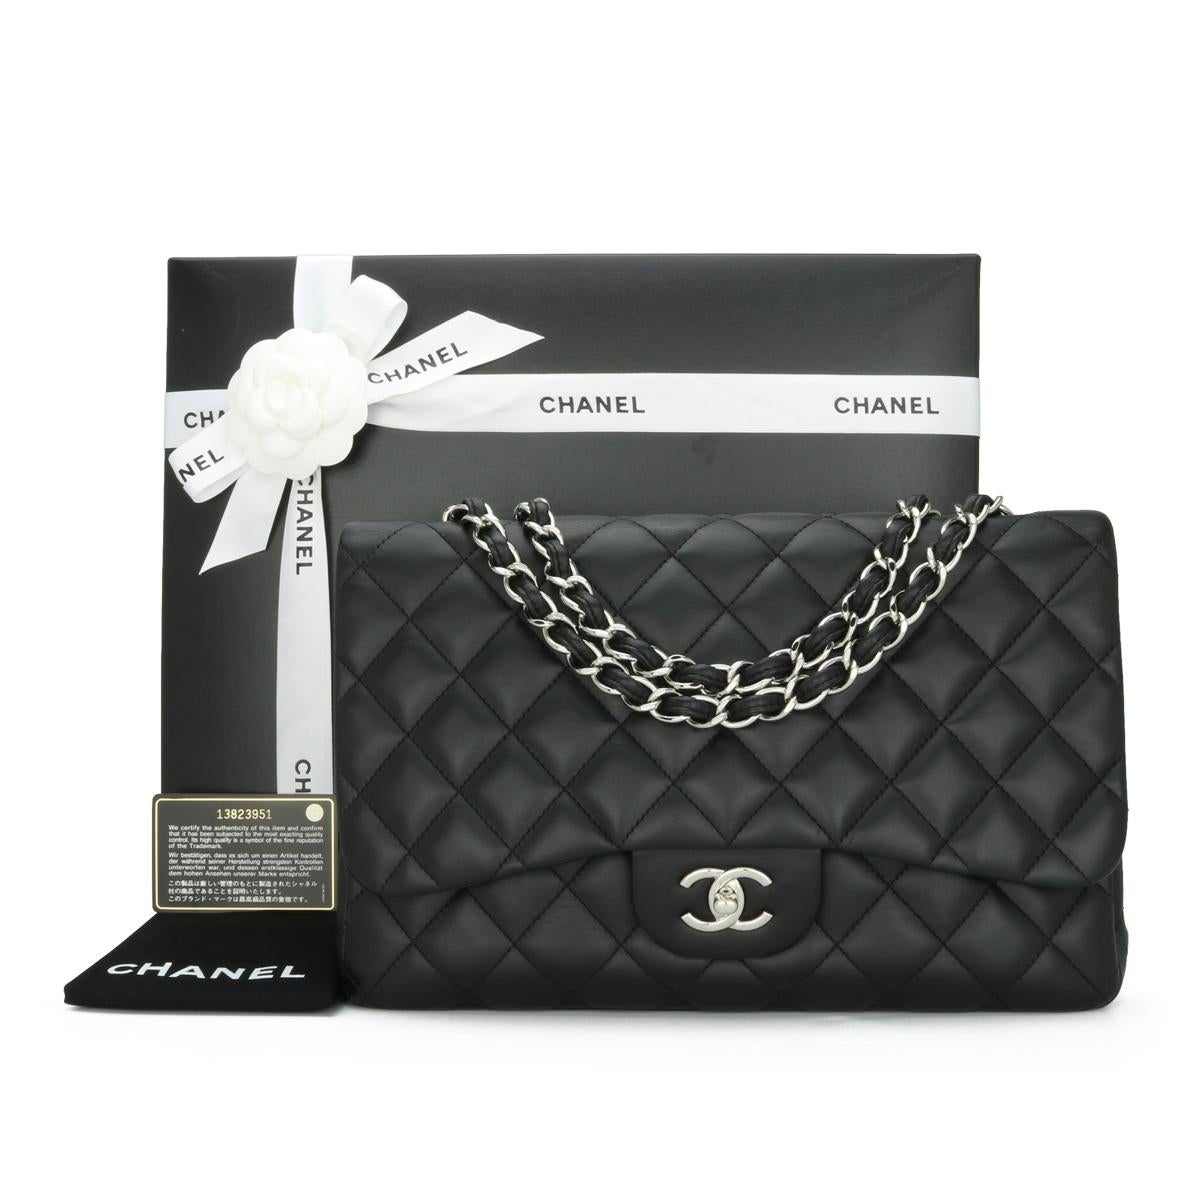 CHANEL Classic Single Flap Jumbo Bag in Black Lambskin with Silver-Tone Hardware 2010.

This stunning bag is in good condition, the bag still holds its shape well, and the hardware is still very shiny.

It is such a lightweight bag compared to